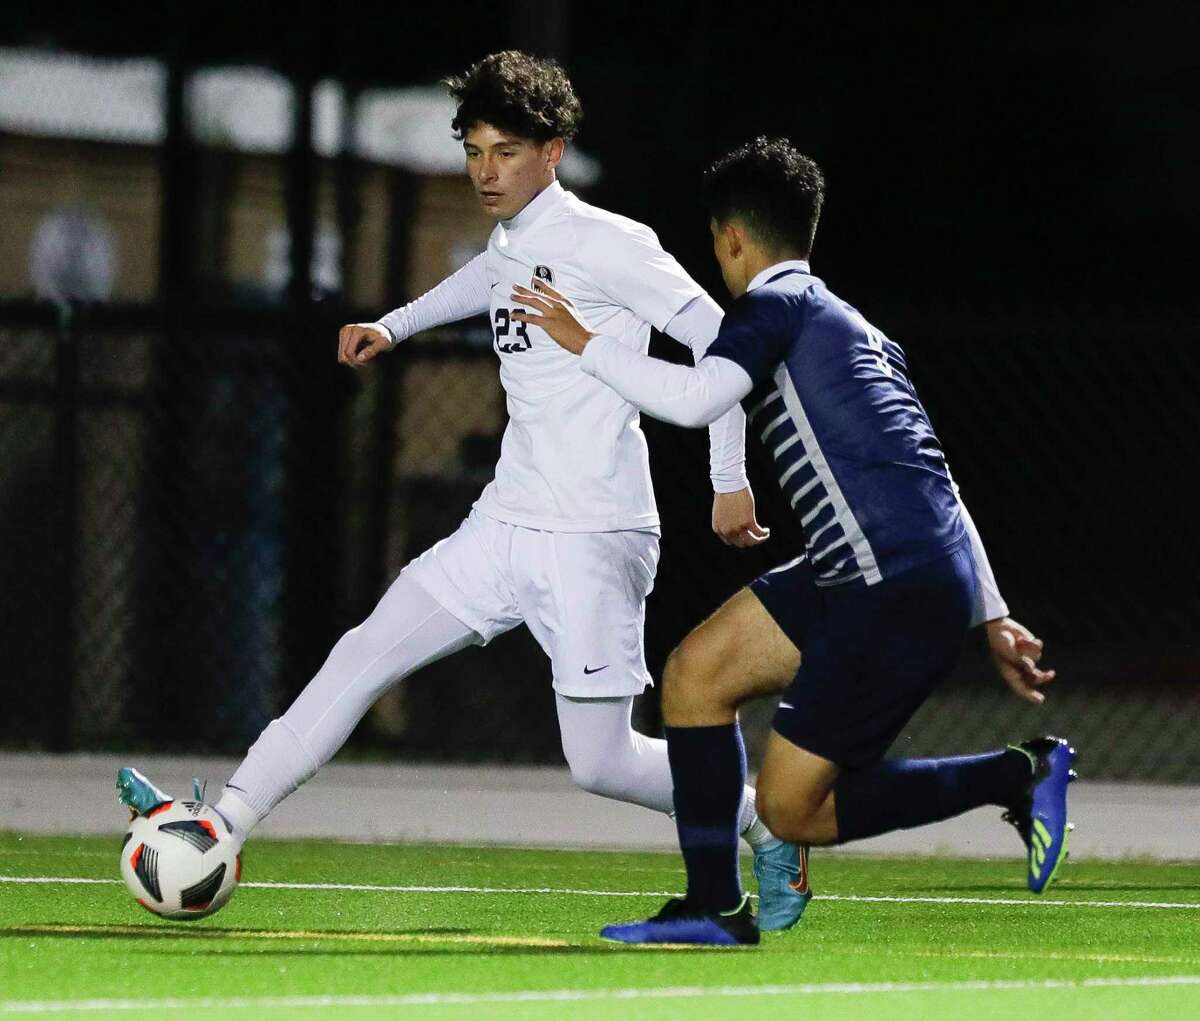 Conroe’s Julian Vega (23) dribbles the ball in the first period of a District 13-6A high school soccer match at Woodforest Bank Stadium, Tuesday, March 8, 2022, in Shenandoah.